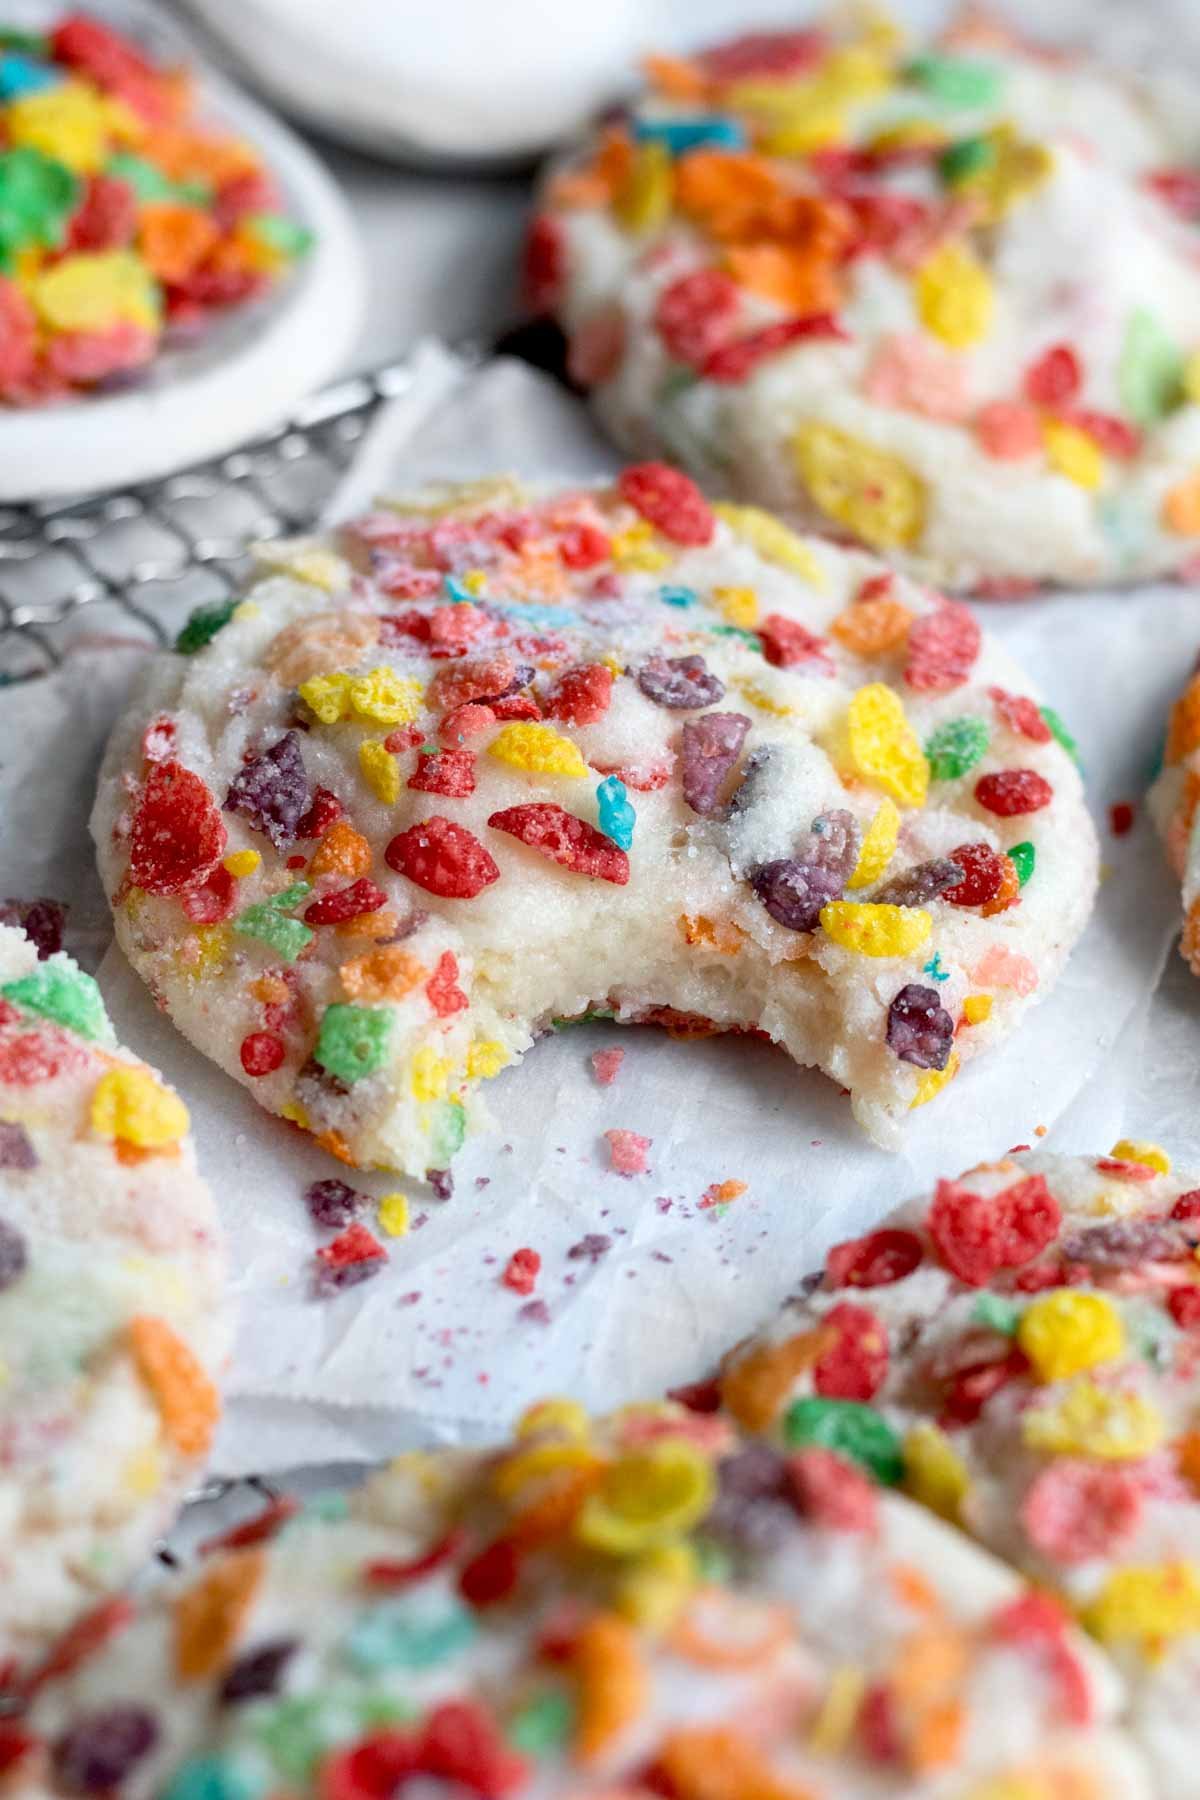 A bitten cookie with fruity pebbles and granulated sugar.